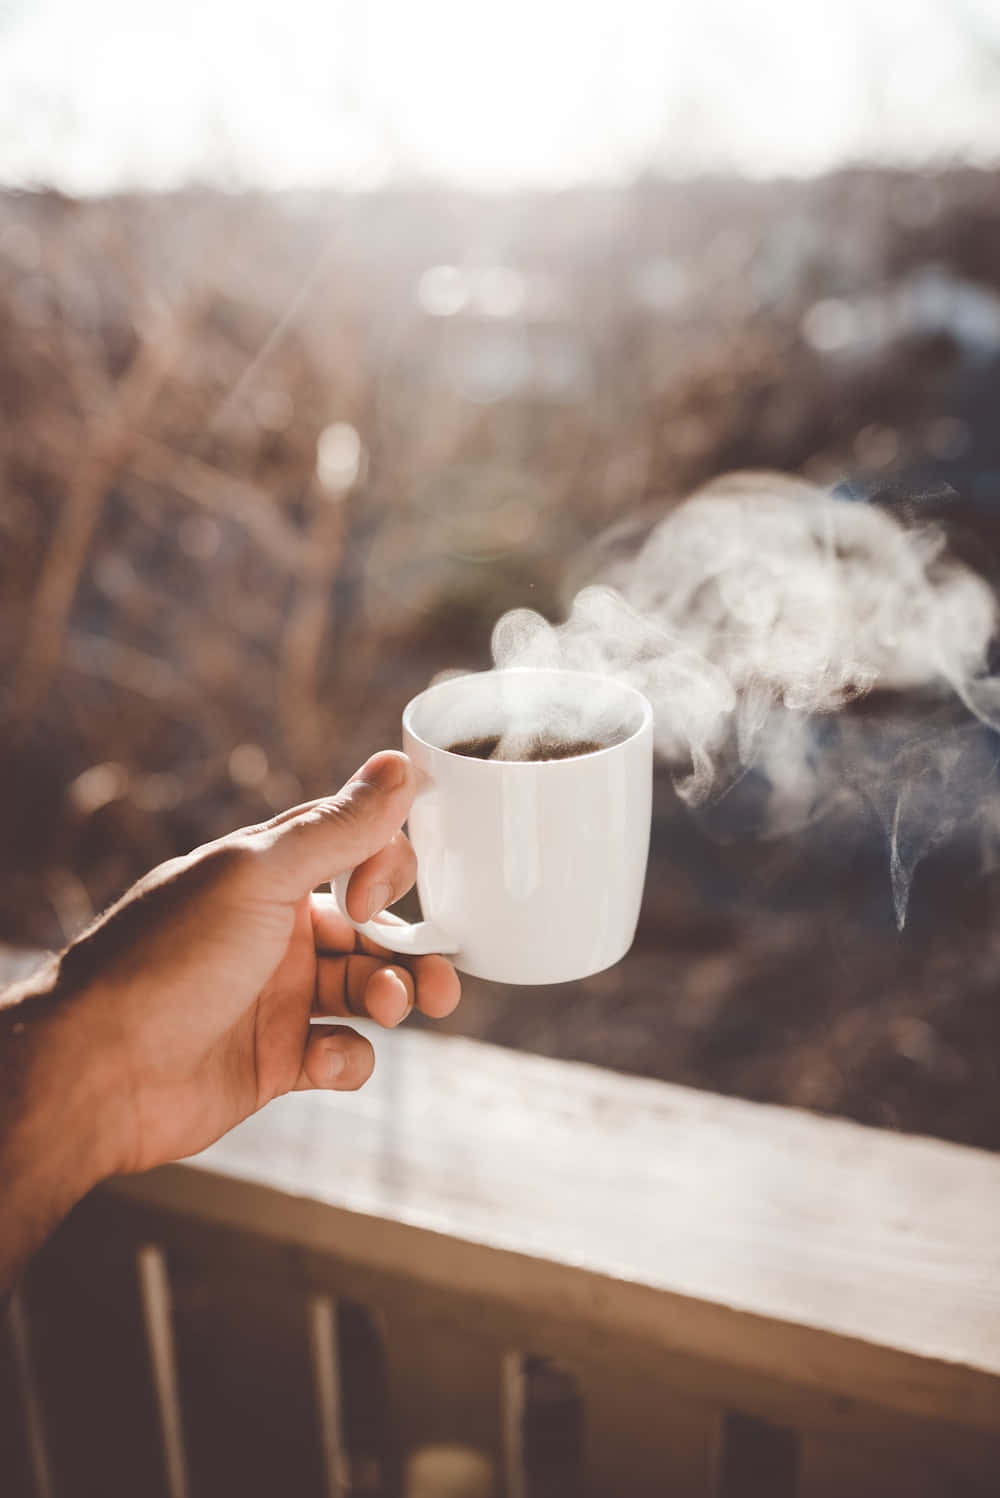 A Hand Holding A Cup Of Coffee With Steam Coming Out Of It